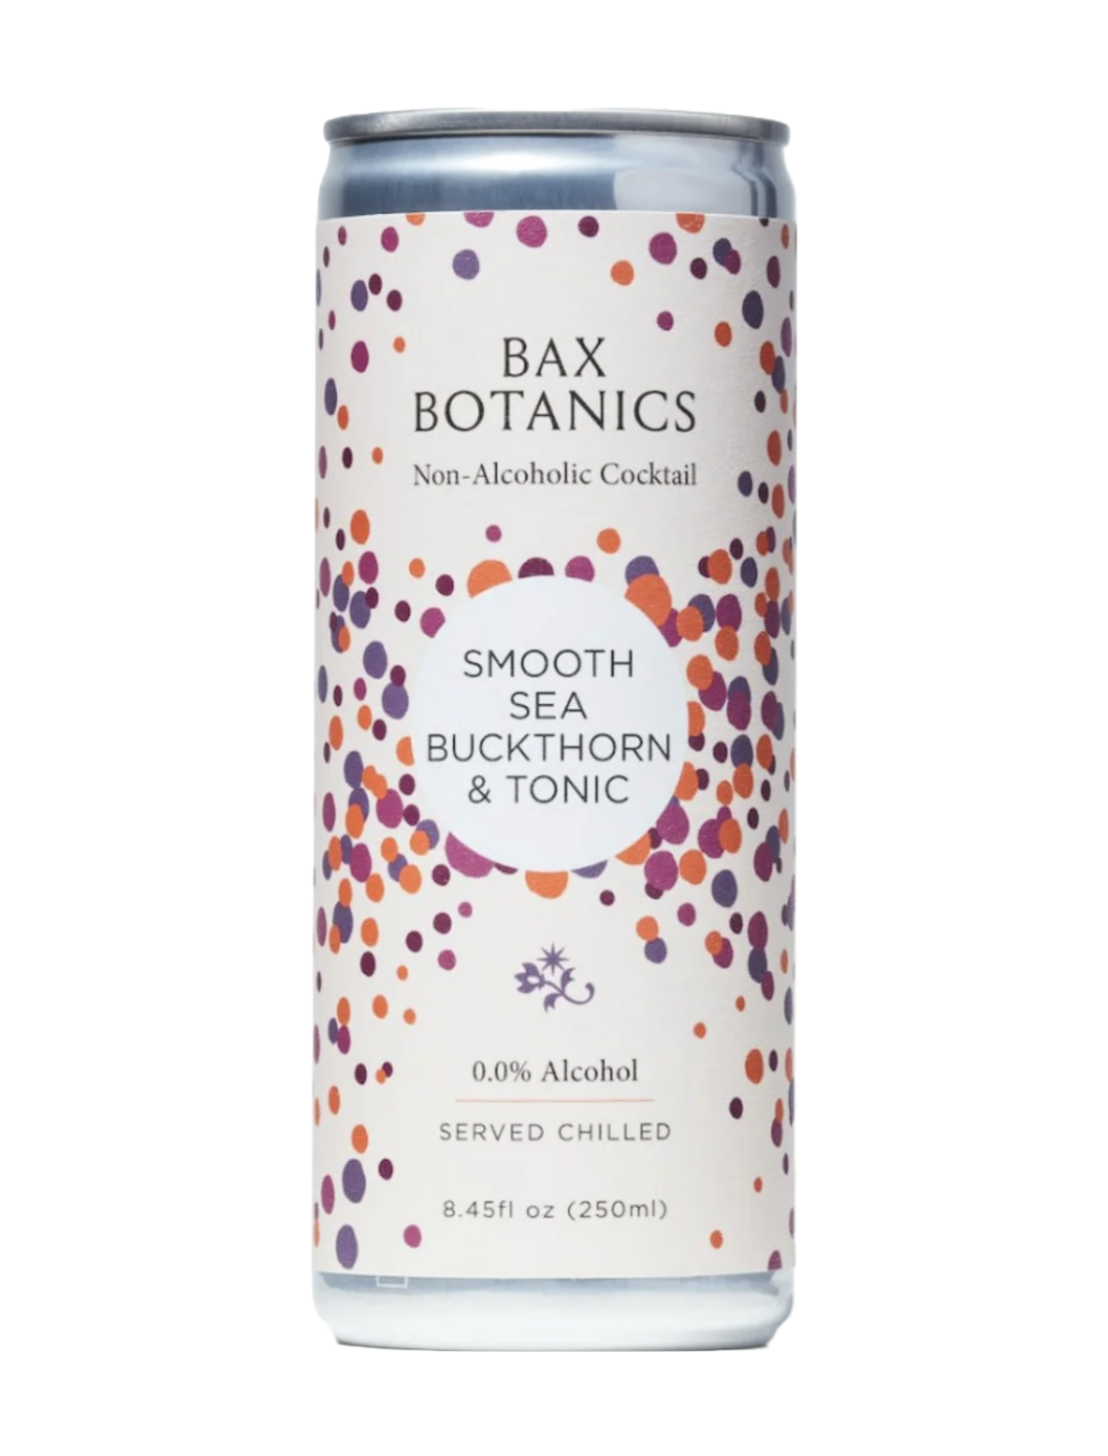 A can of Bax Botanics - Non-Alcoholic Smooth Sea Buckthorn & Tonic in front of a plain white background